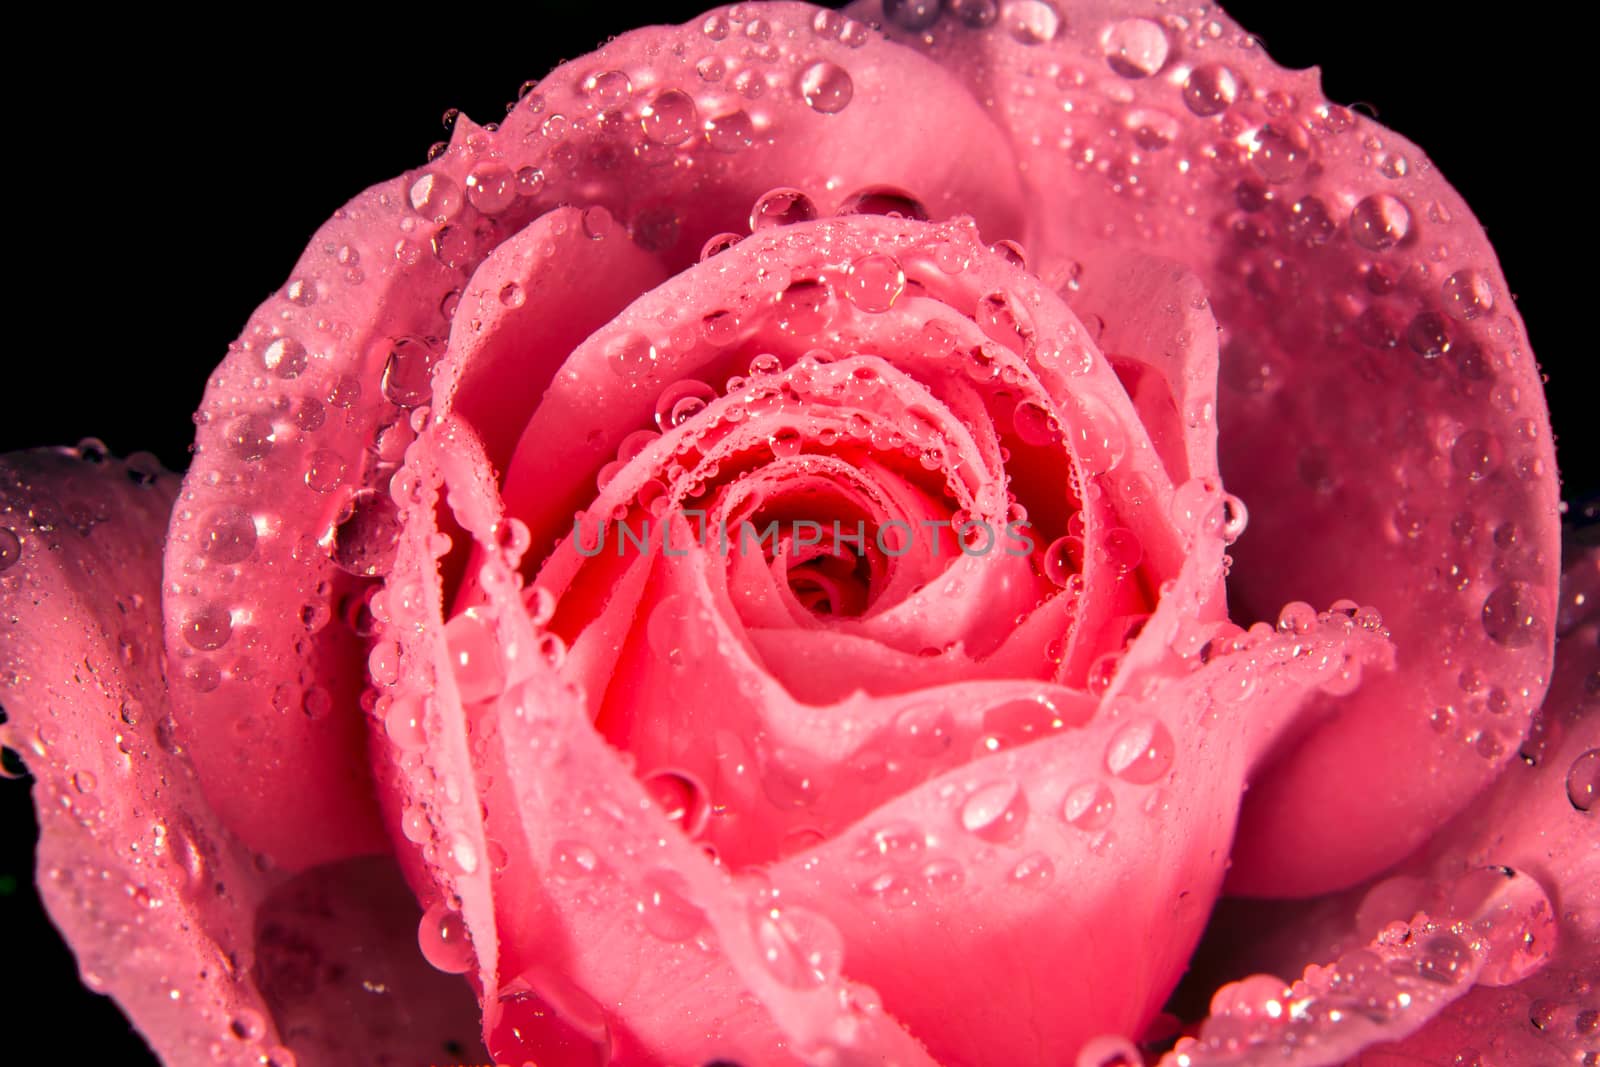 A Rose with small water droplets on the petals